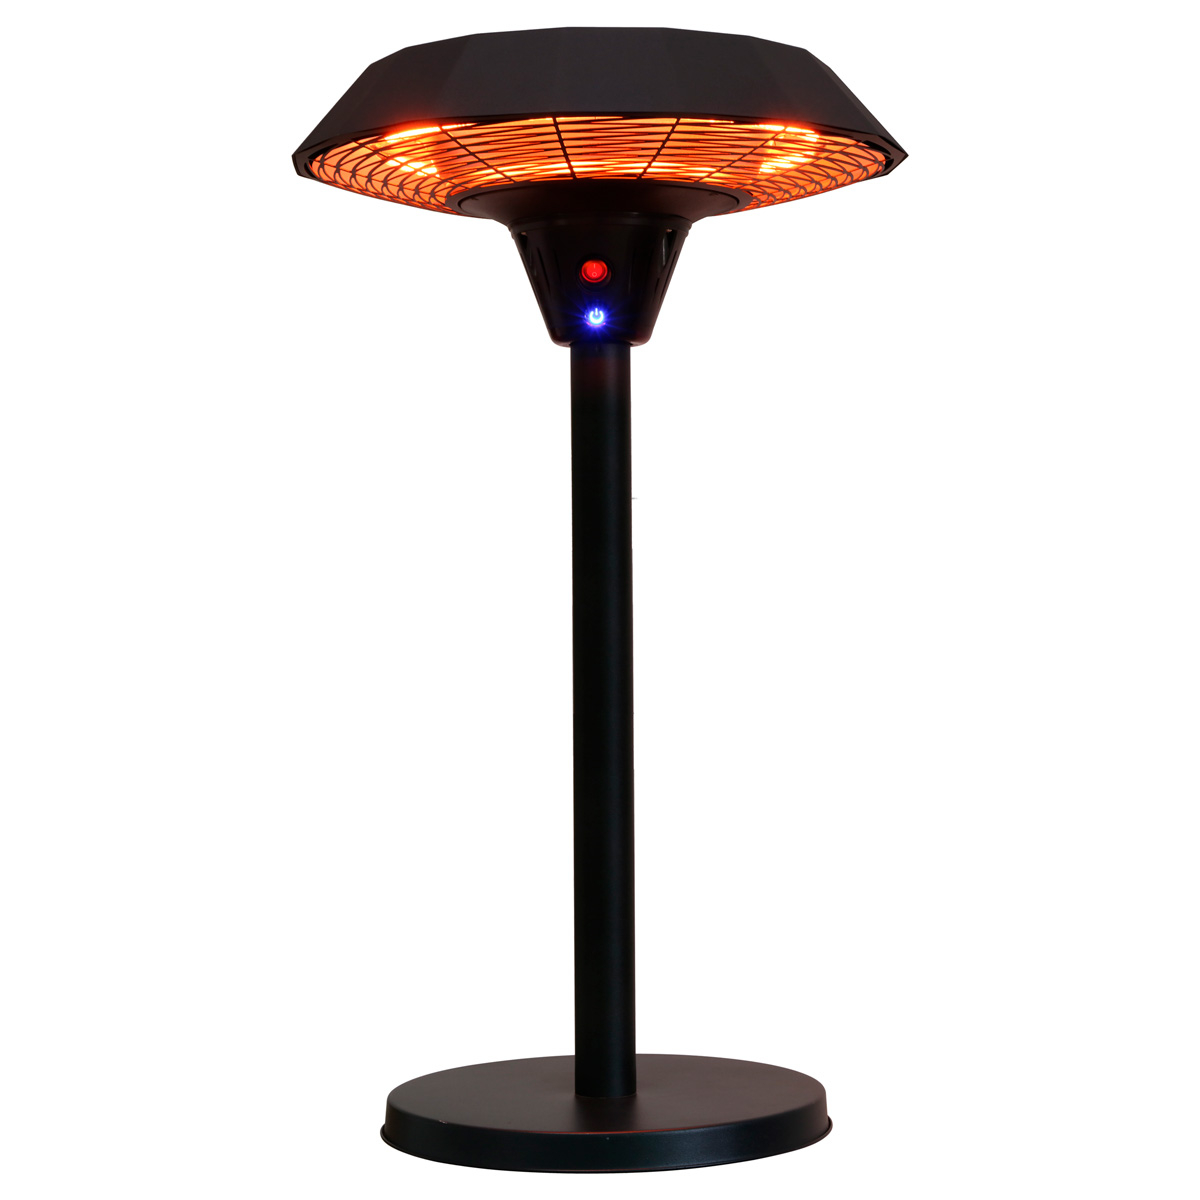 Details About Charles Bentley Electric Table Top Patio Heater 2000 W 240 V throughout dimensions 1200 X 1200